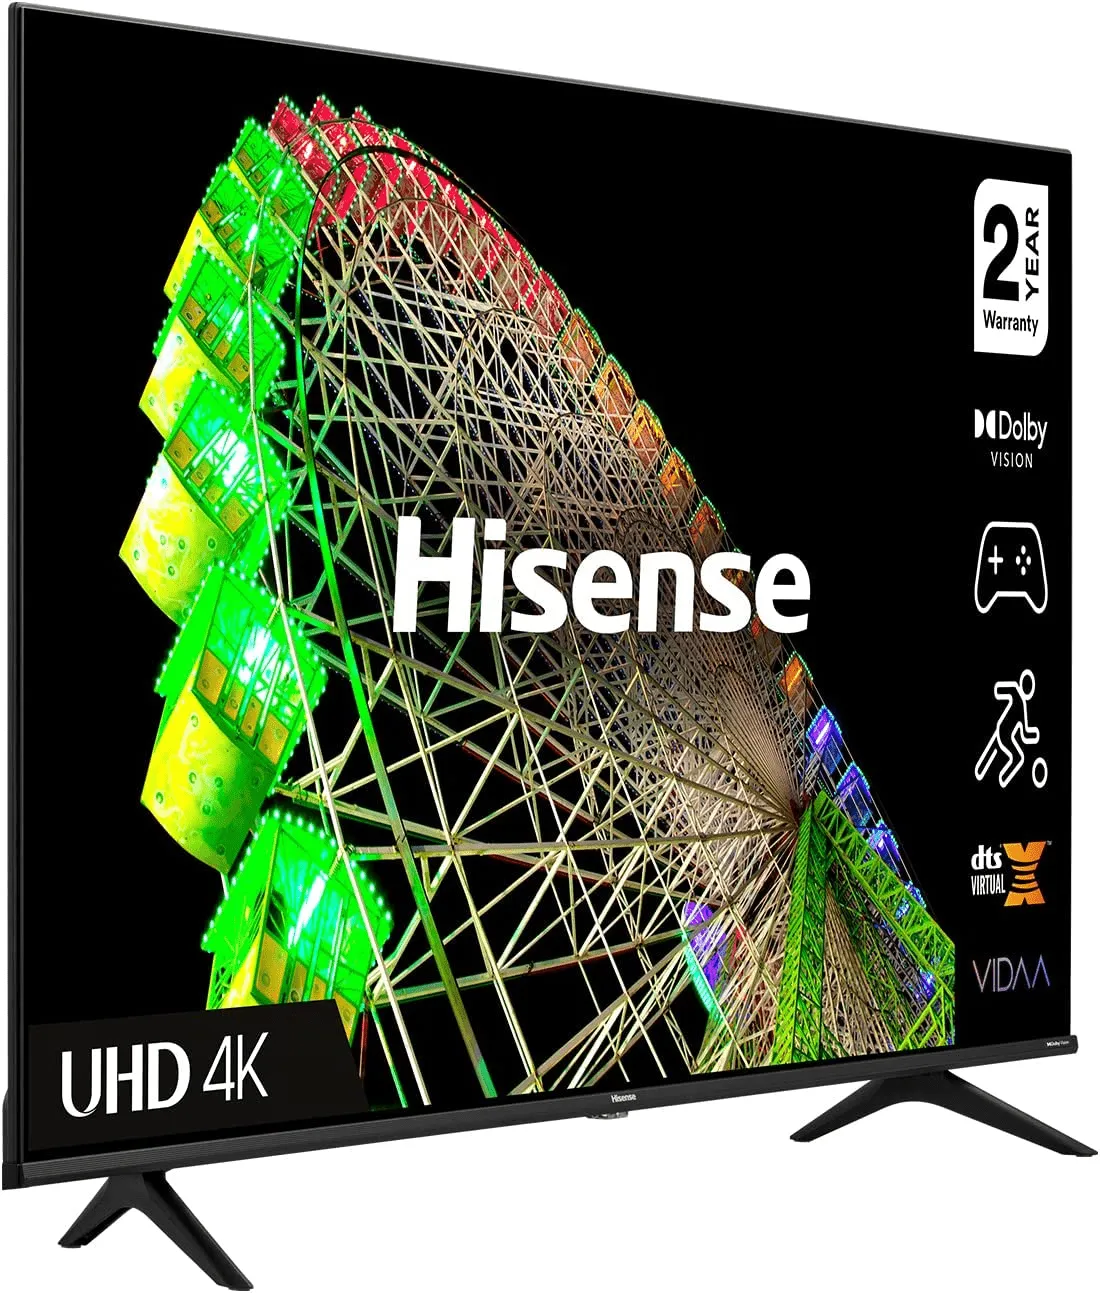 Hisense 4K UHD Smart TV with Dolby Vision HDR and DTS Virtual X